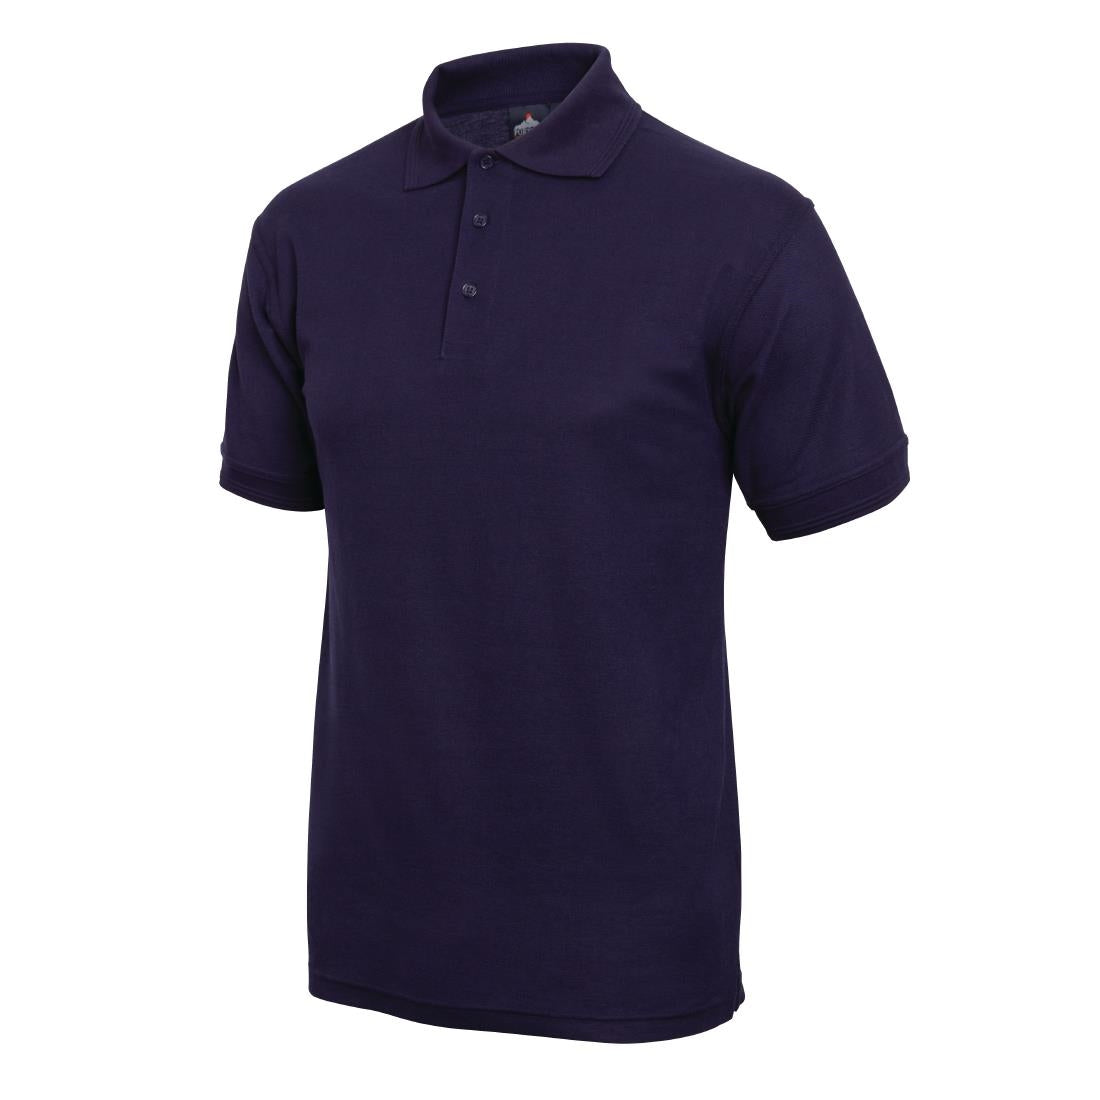 A736-S Portwest Unisex Polo Shirt Navy Blue S JD Catering Equipment Solutions Ltd